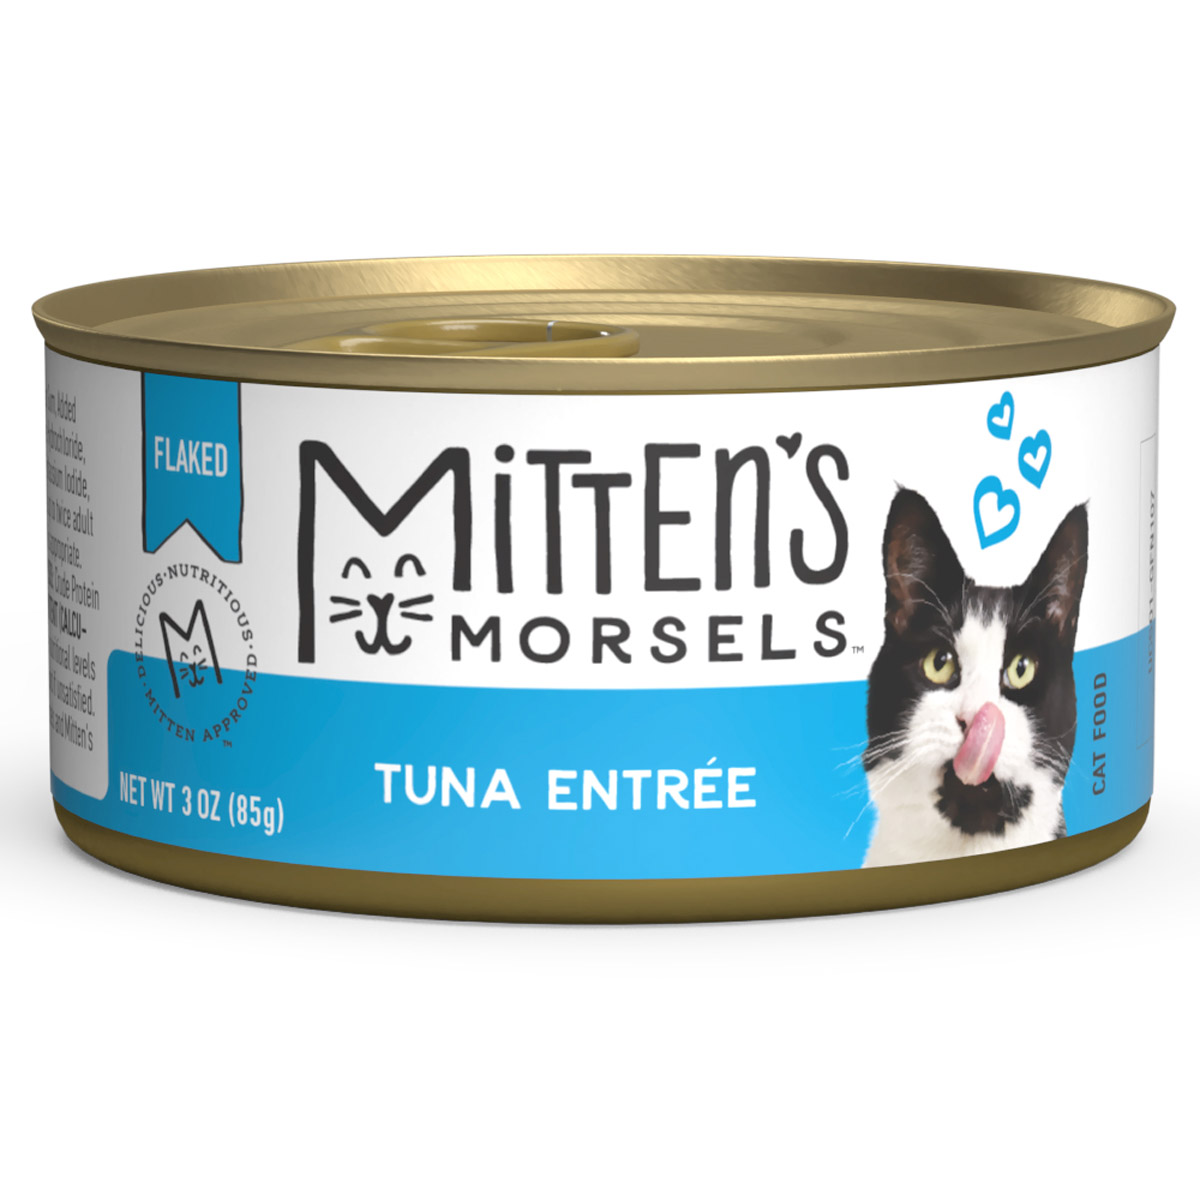 Mittens Morsels Flaked Tuna Entree Wet Cat Food, 3 Ounces